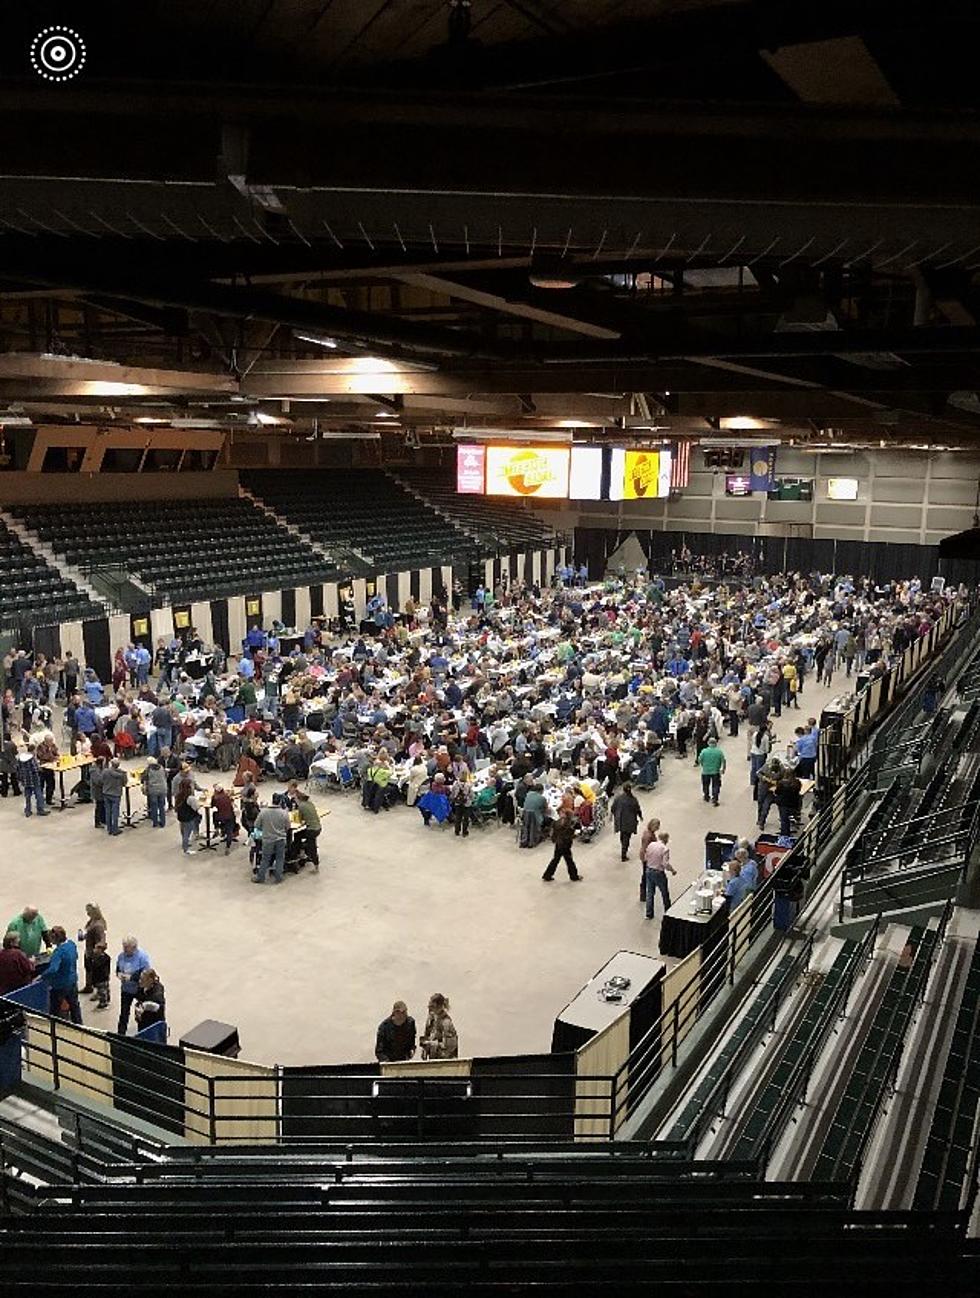 10th annual Empty Bowls was a tremendous night for Butte